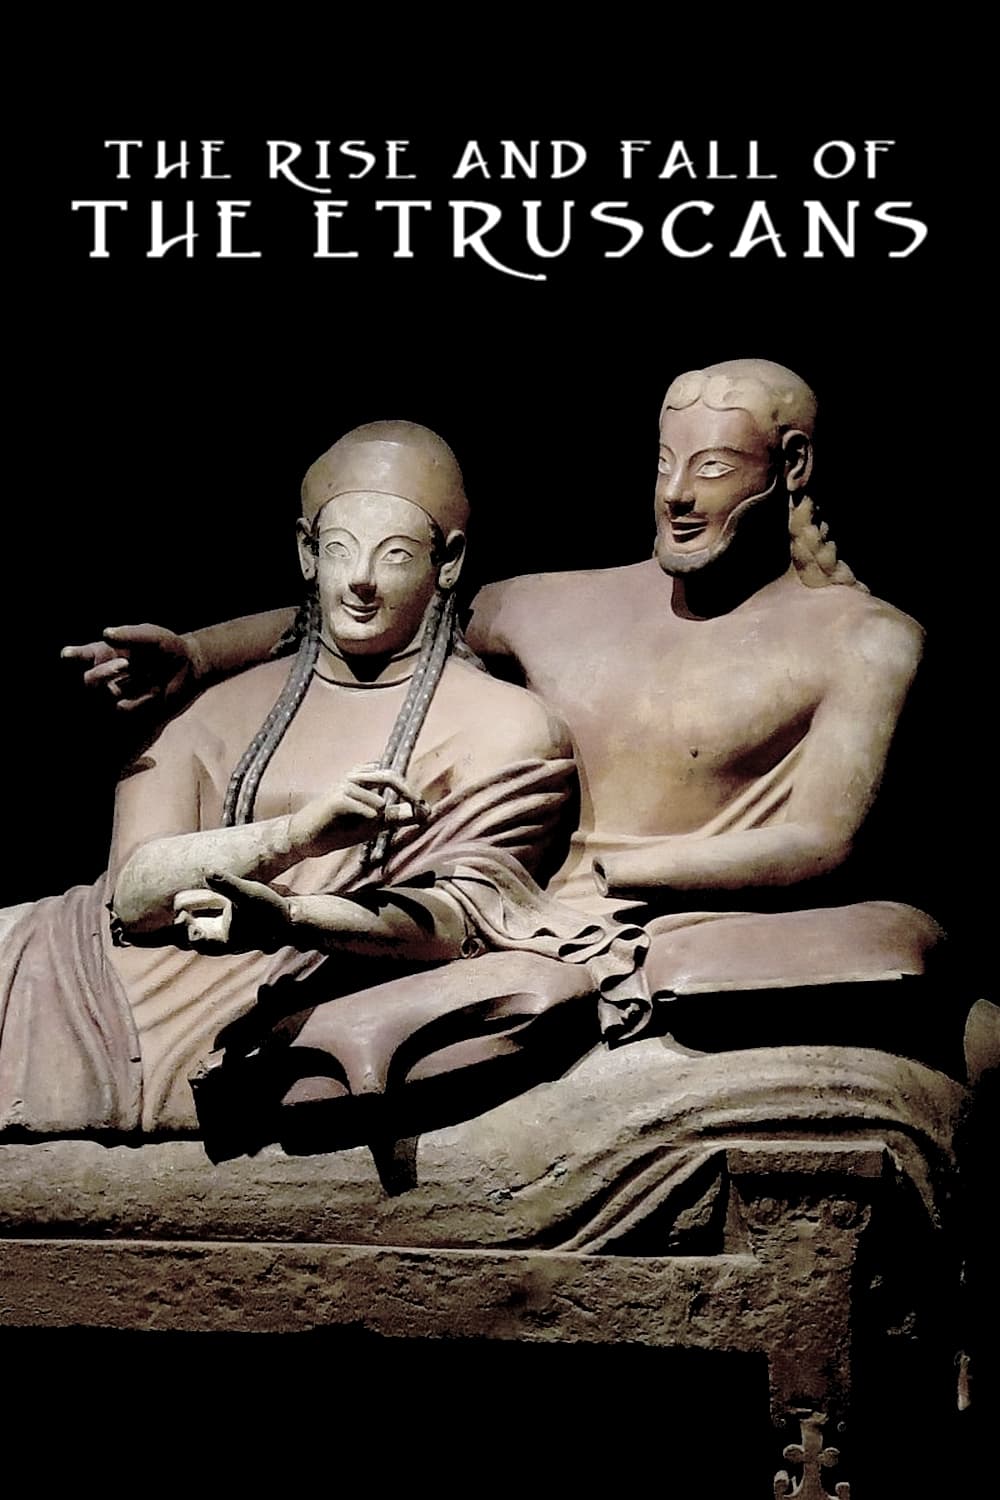 The Rise and Fall of the Etruscans